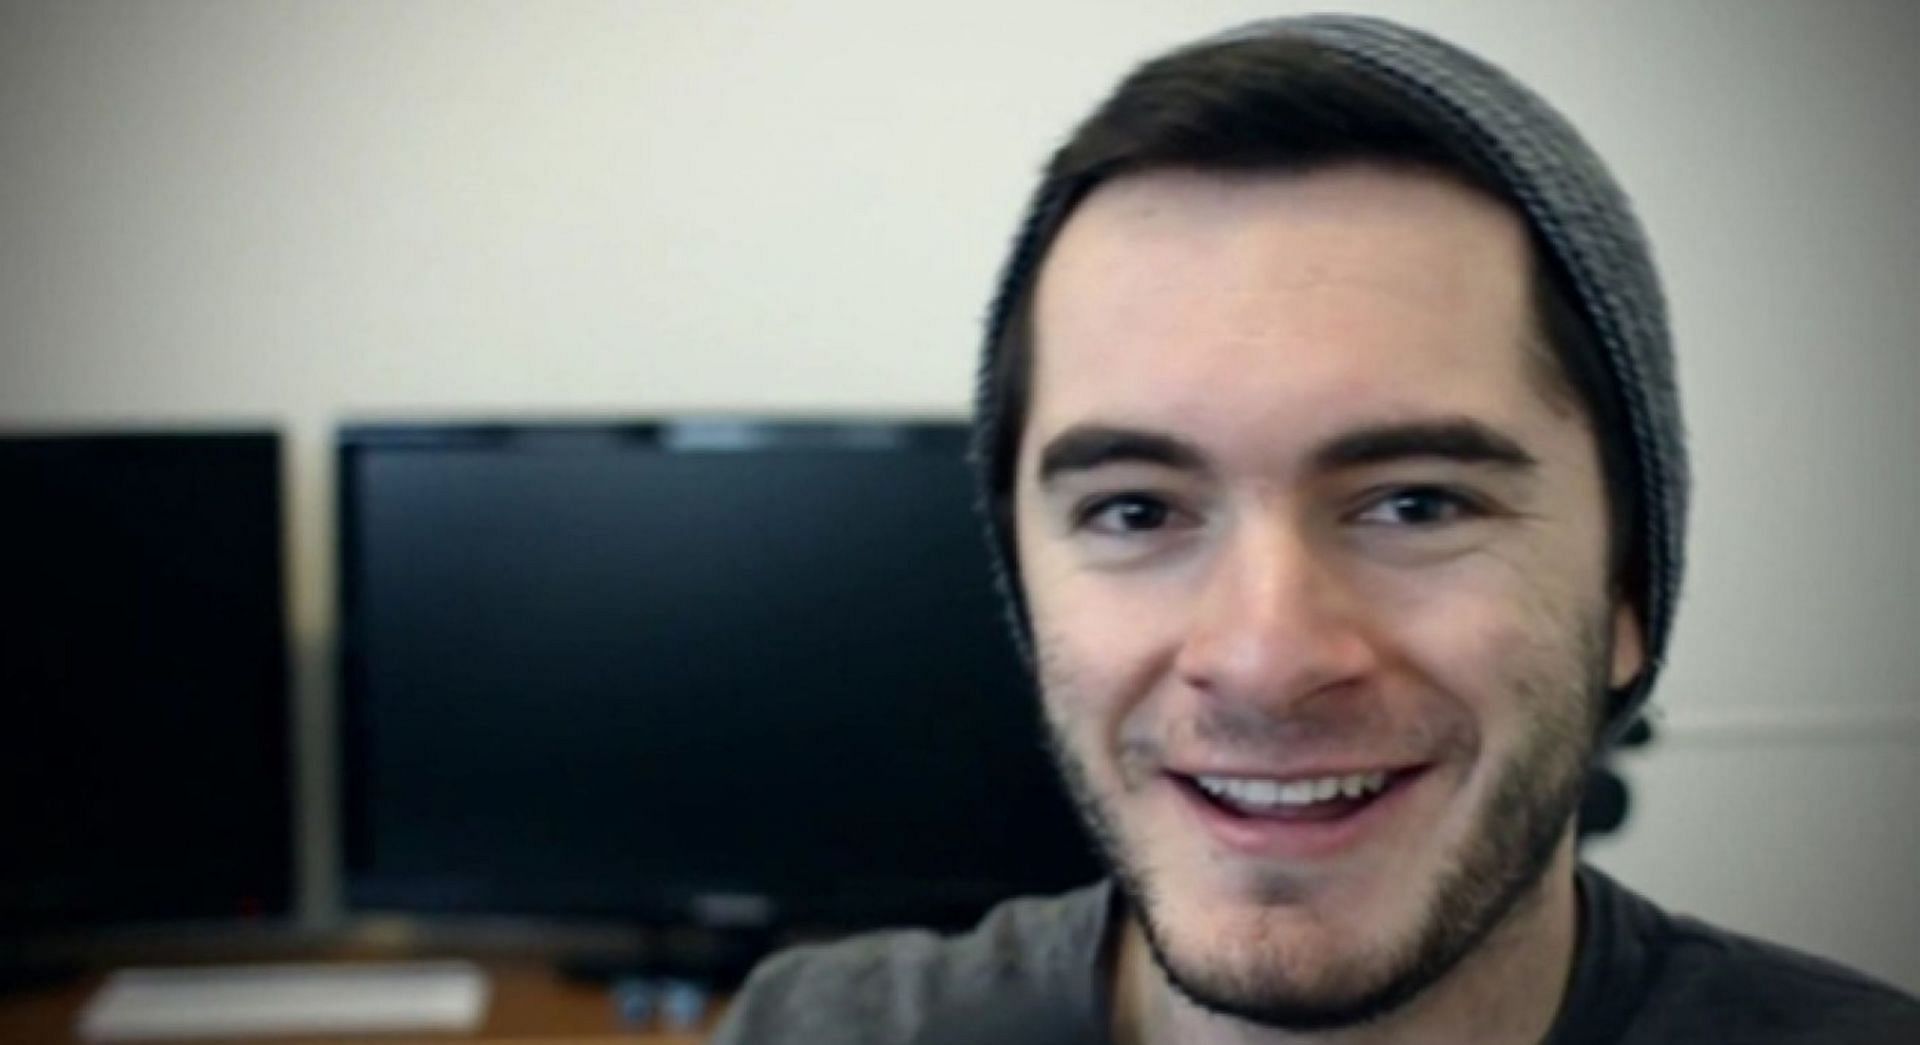 CaptainSparklez releases gaming content in addition to reactions and even music (Image via Tubefilter)